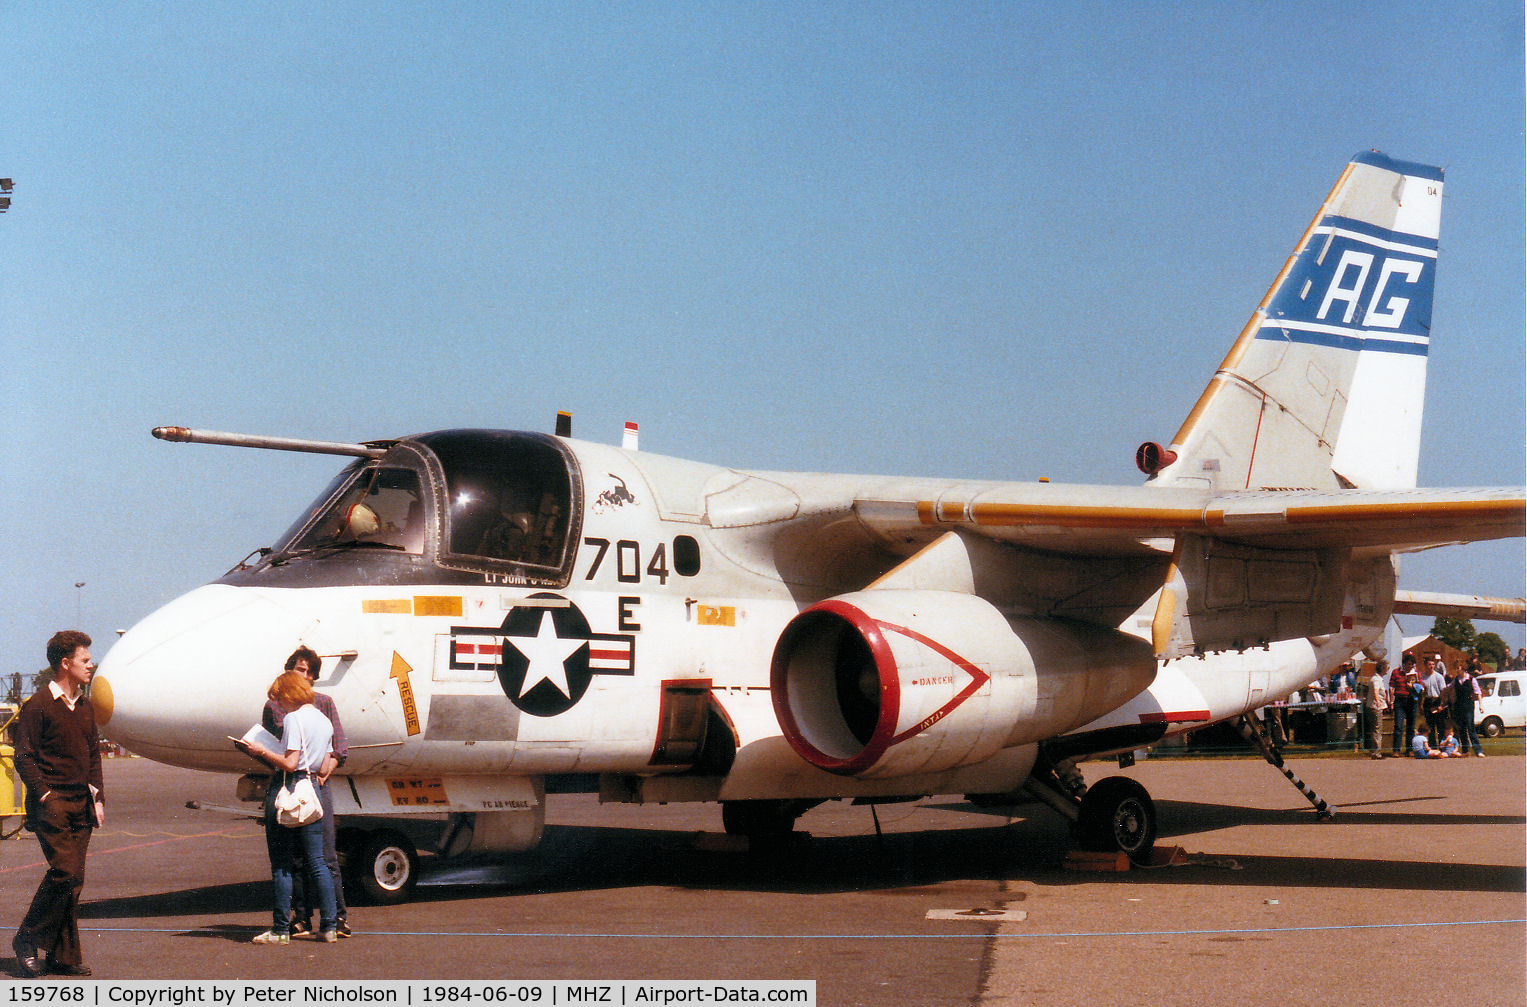 159768, Lockheed S-3A Viking C/N 394A-1097, Another view of the VS-31 S-3A Viking from USS Dwight D Eisenhower on display at the 1984 RAF Mildenhall Air Fete.